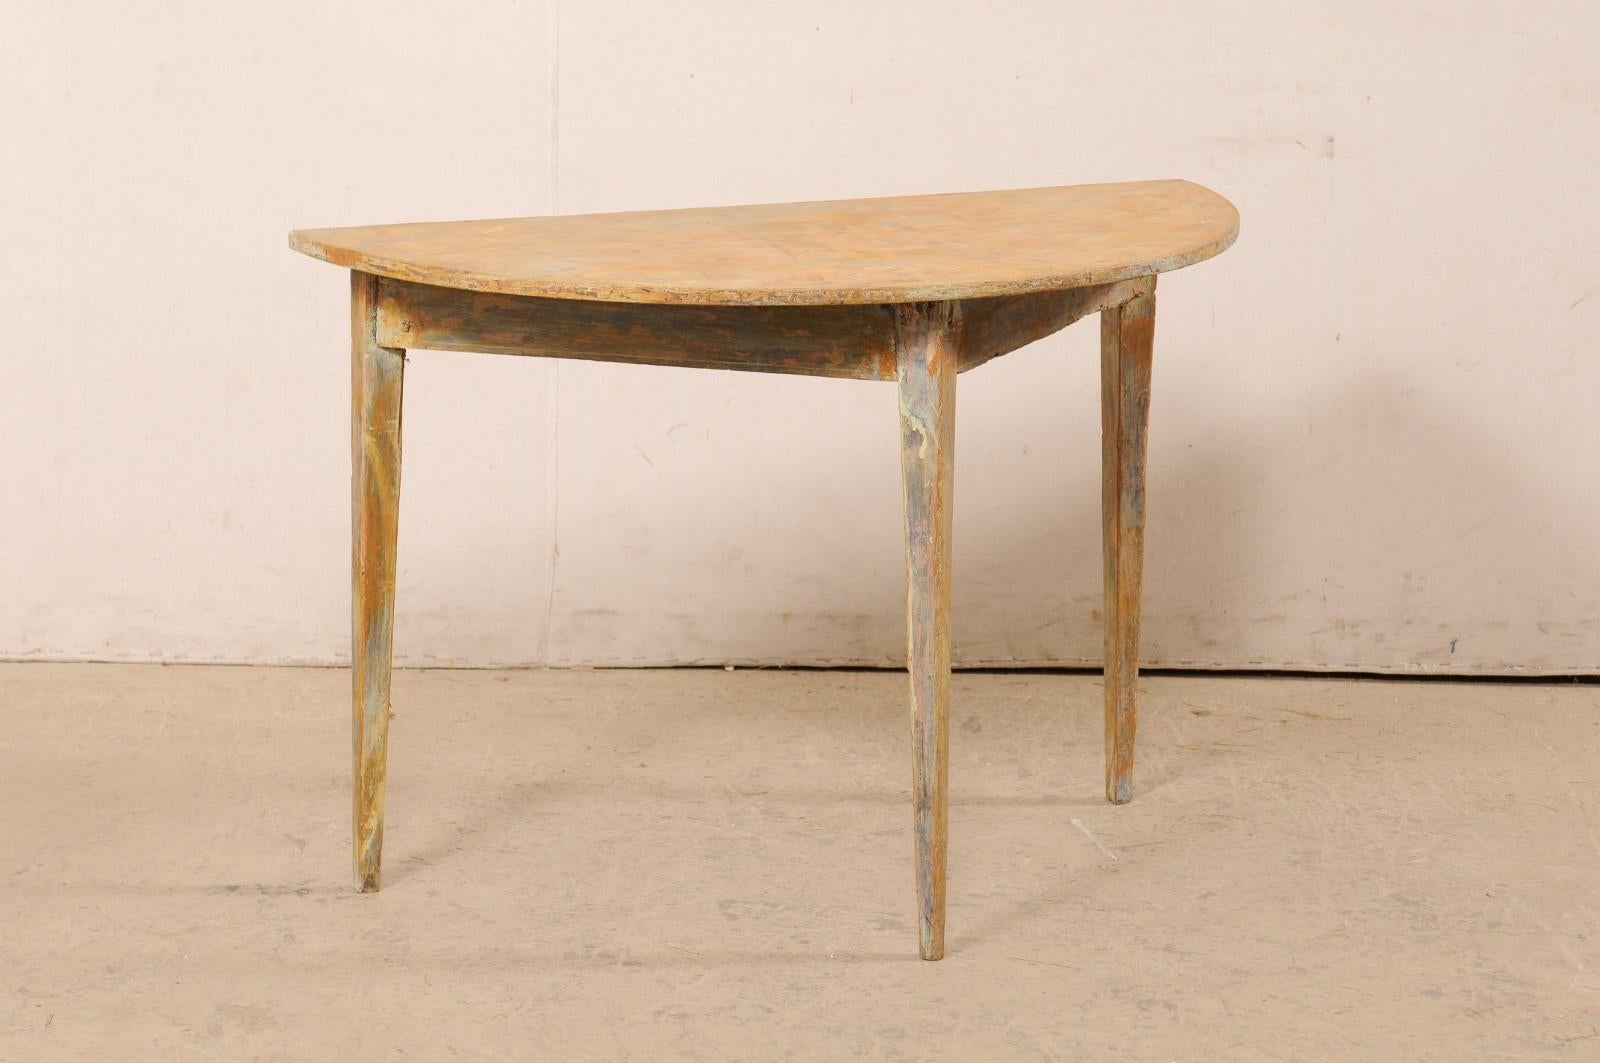 A single Swedish wooden demi-lune table from the 19th century. This antique table from Sweden, circa 1880's, features a semi-circular top over a plain triangular shaped apron, and is raised upon three squared and gently tapered legs. The table has